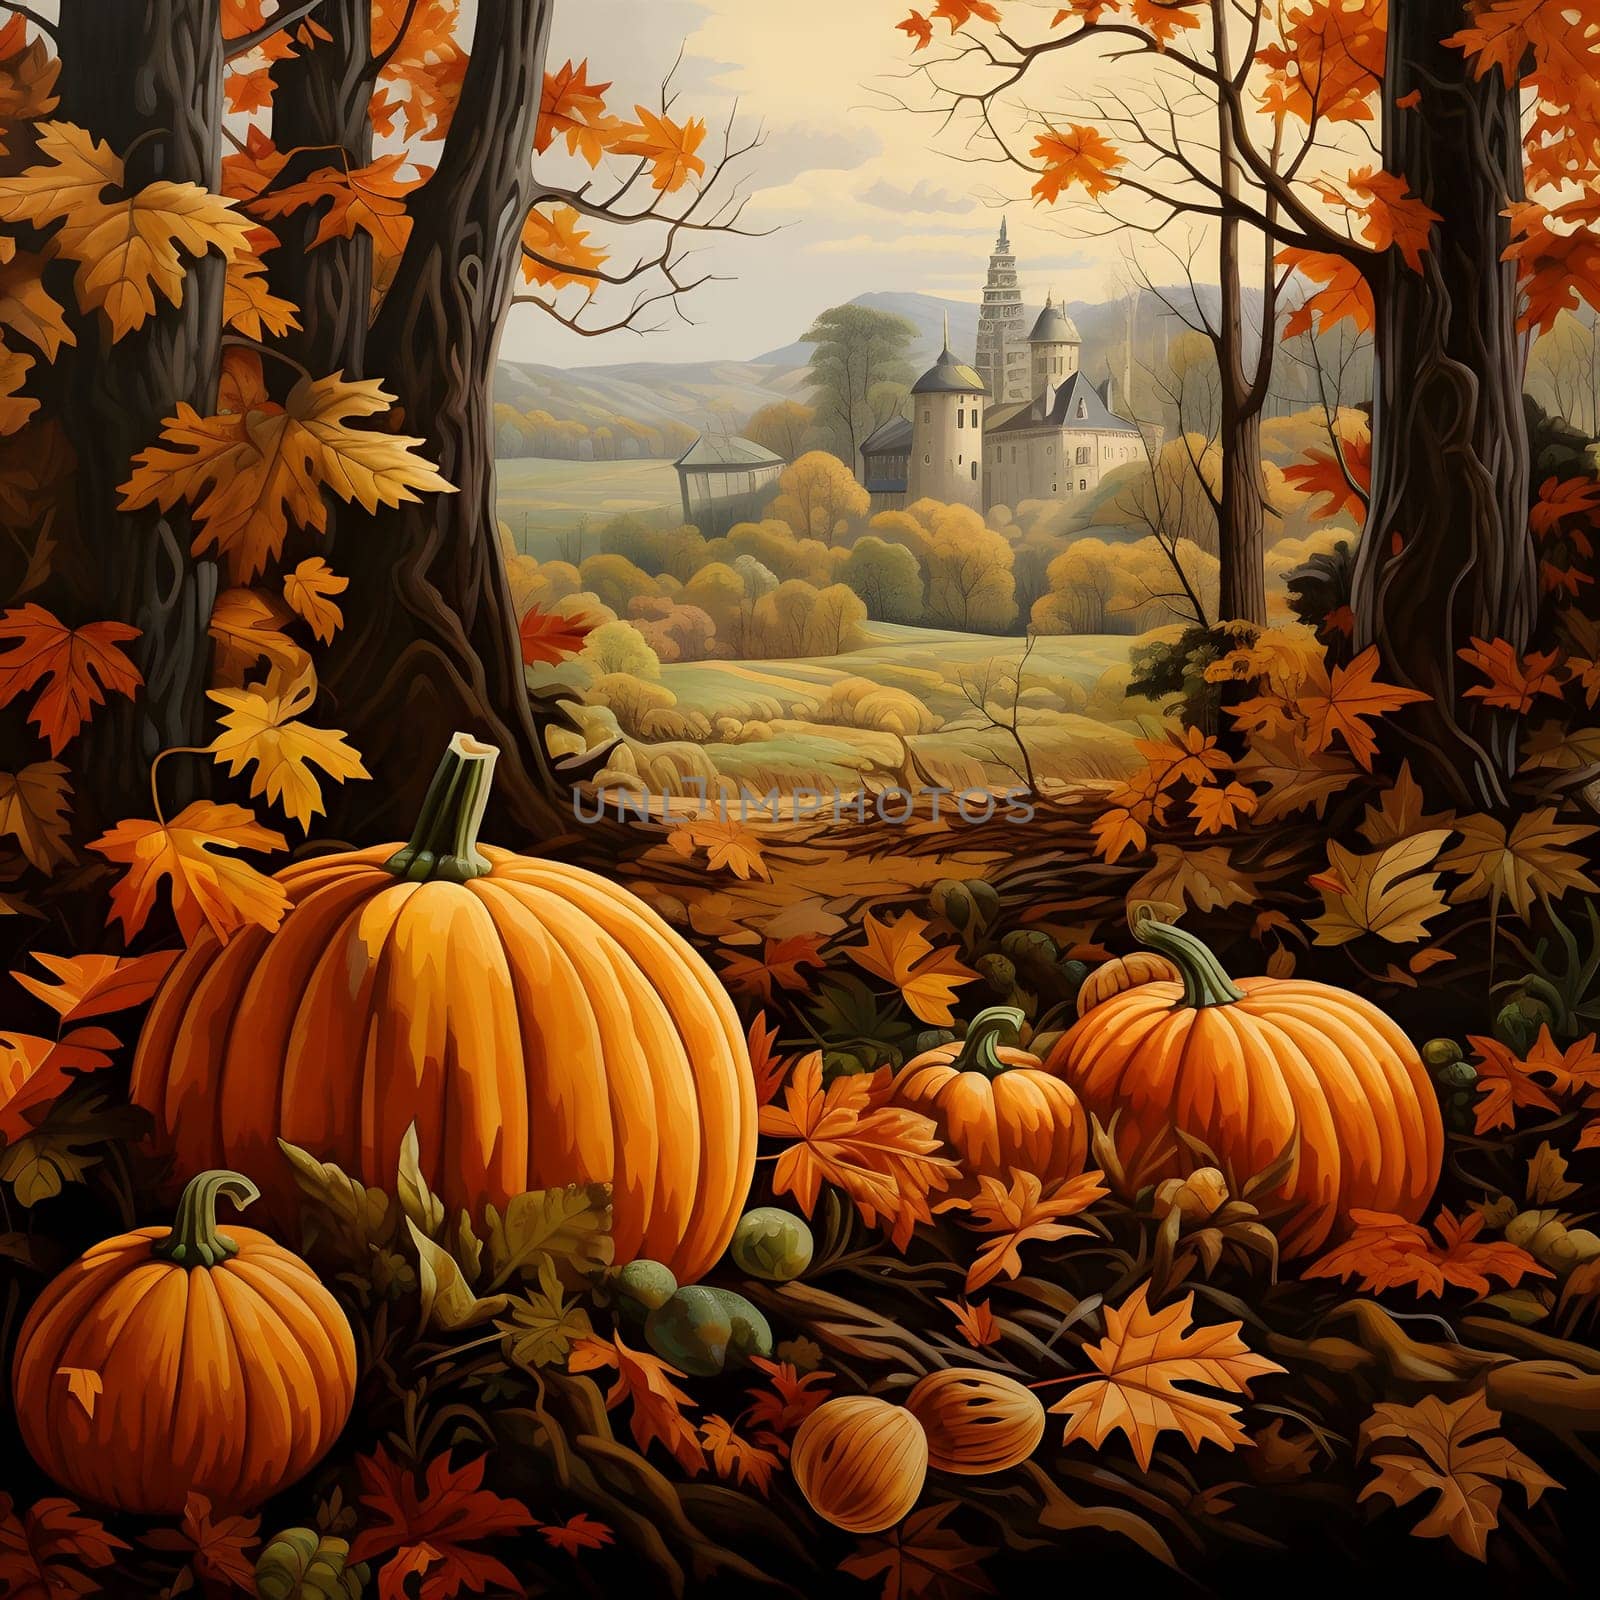 Illustration of pumpkins in the forest around the leaves. Pumpkin as a dish of thanksgiving for the harvest. The atmosphere of joy and celebration.